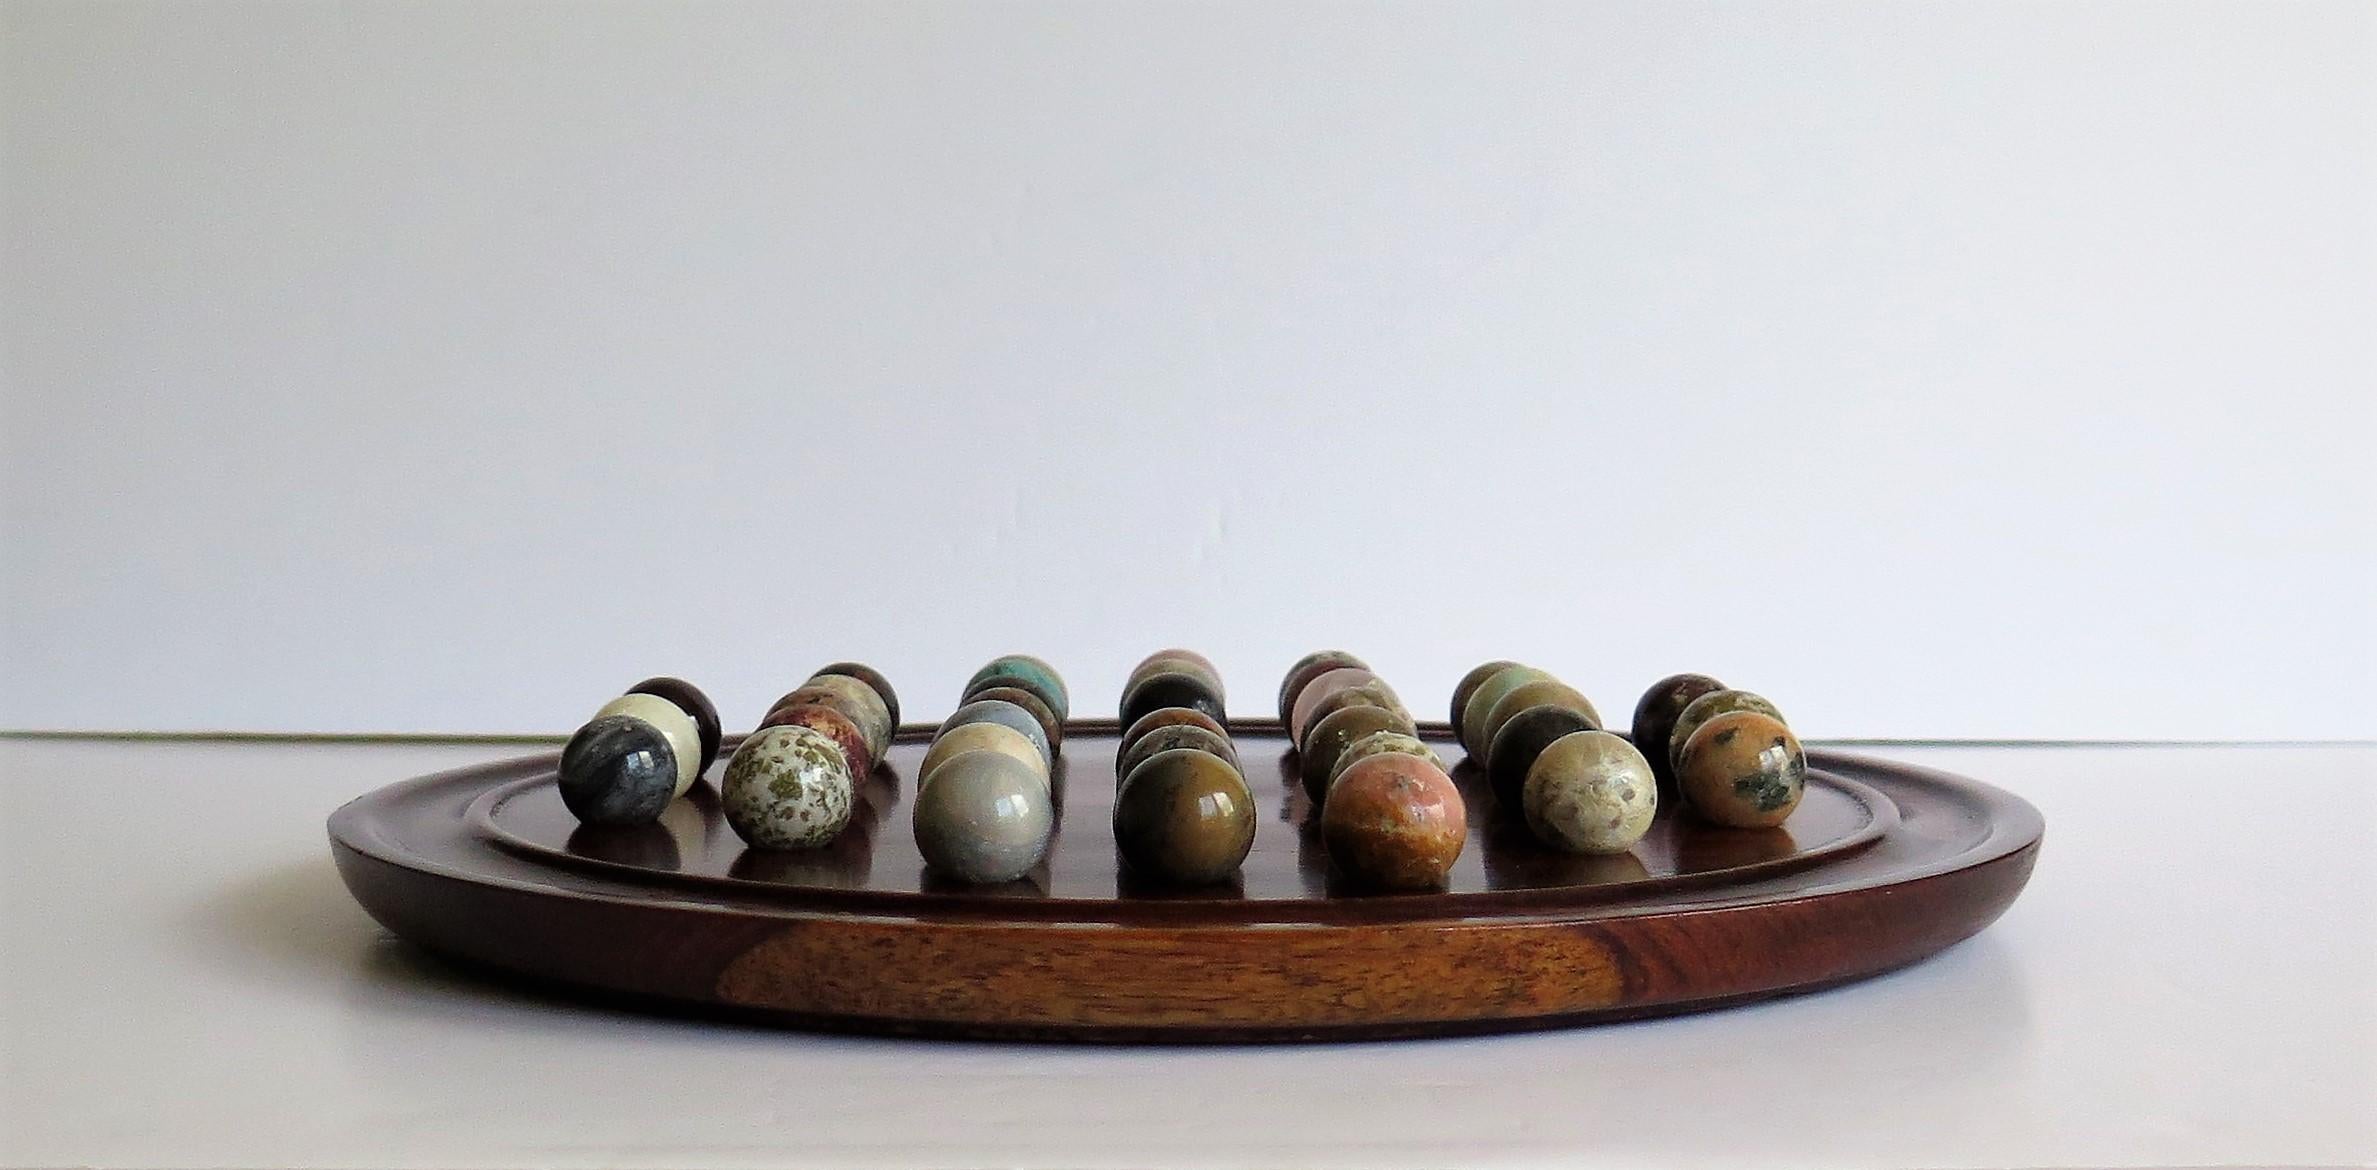 Hand-Crafted Marble Solitaire Game Polished Hardwood Board 36 Agate Stone Marbles, circa 1915